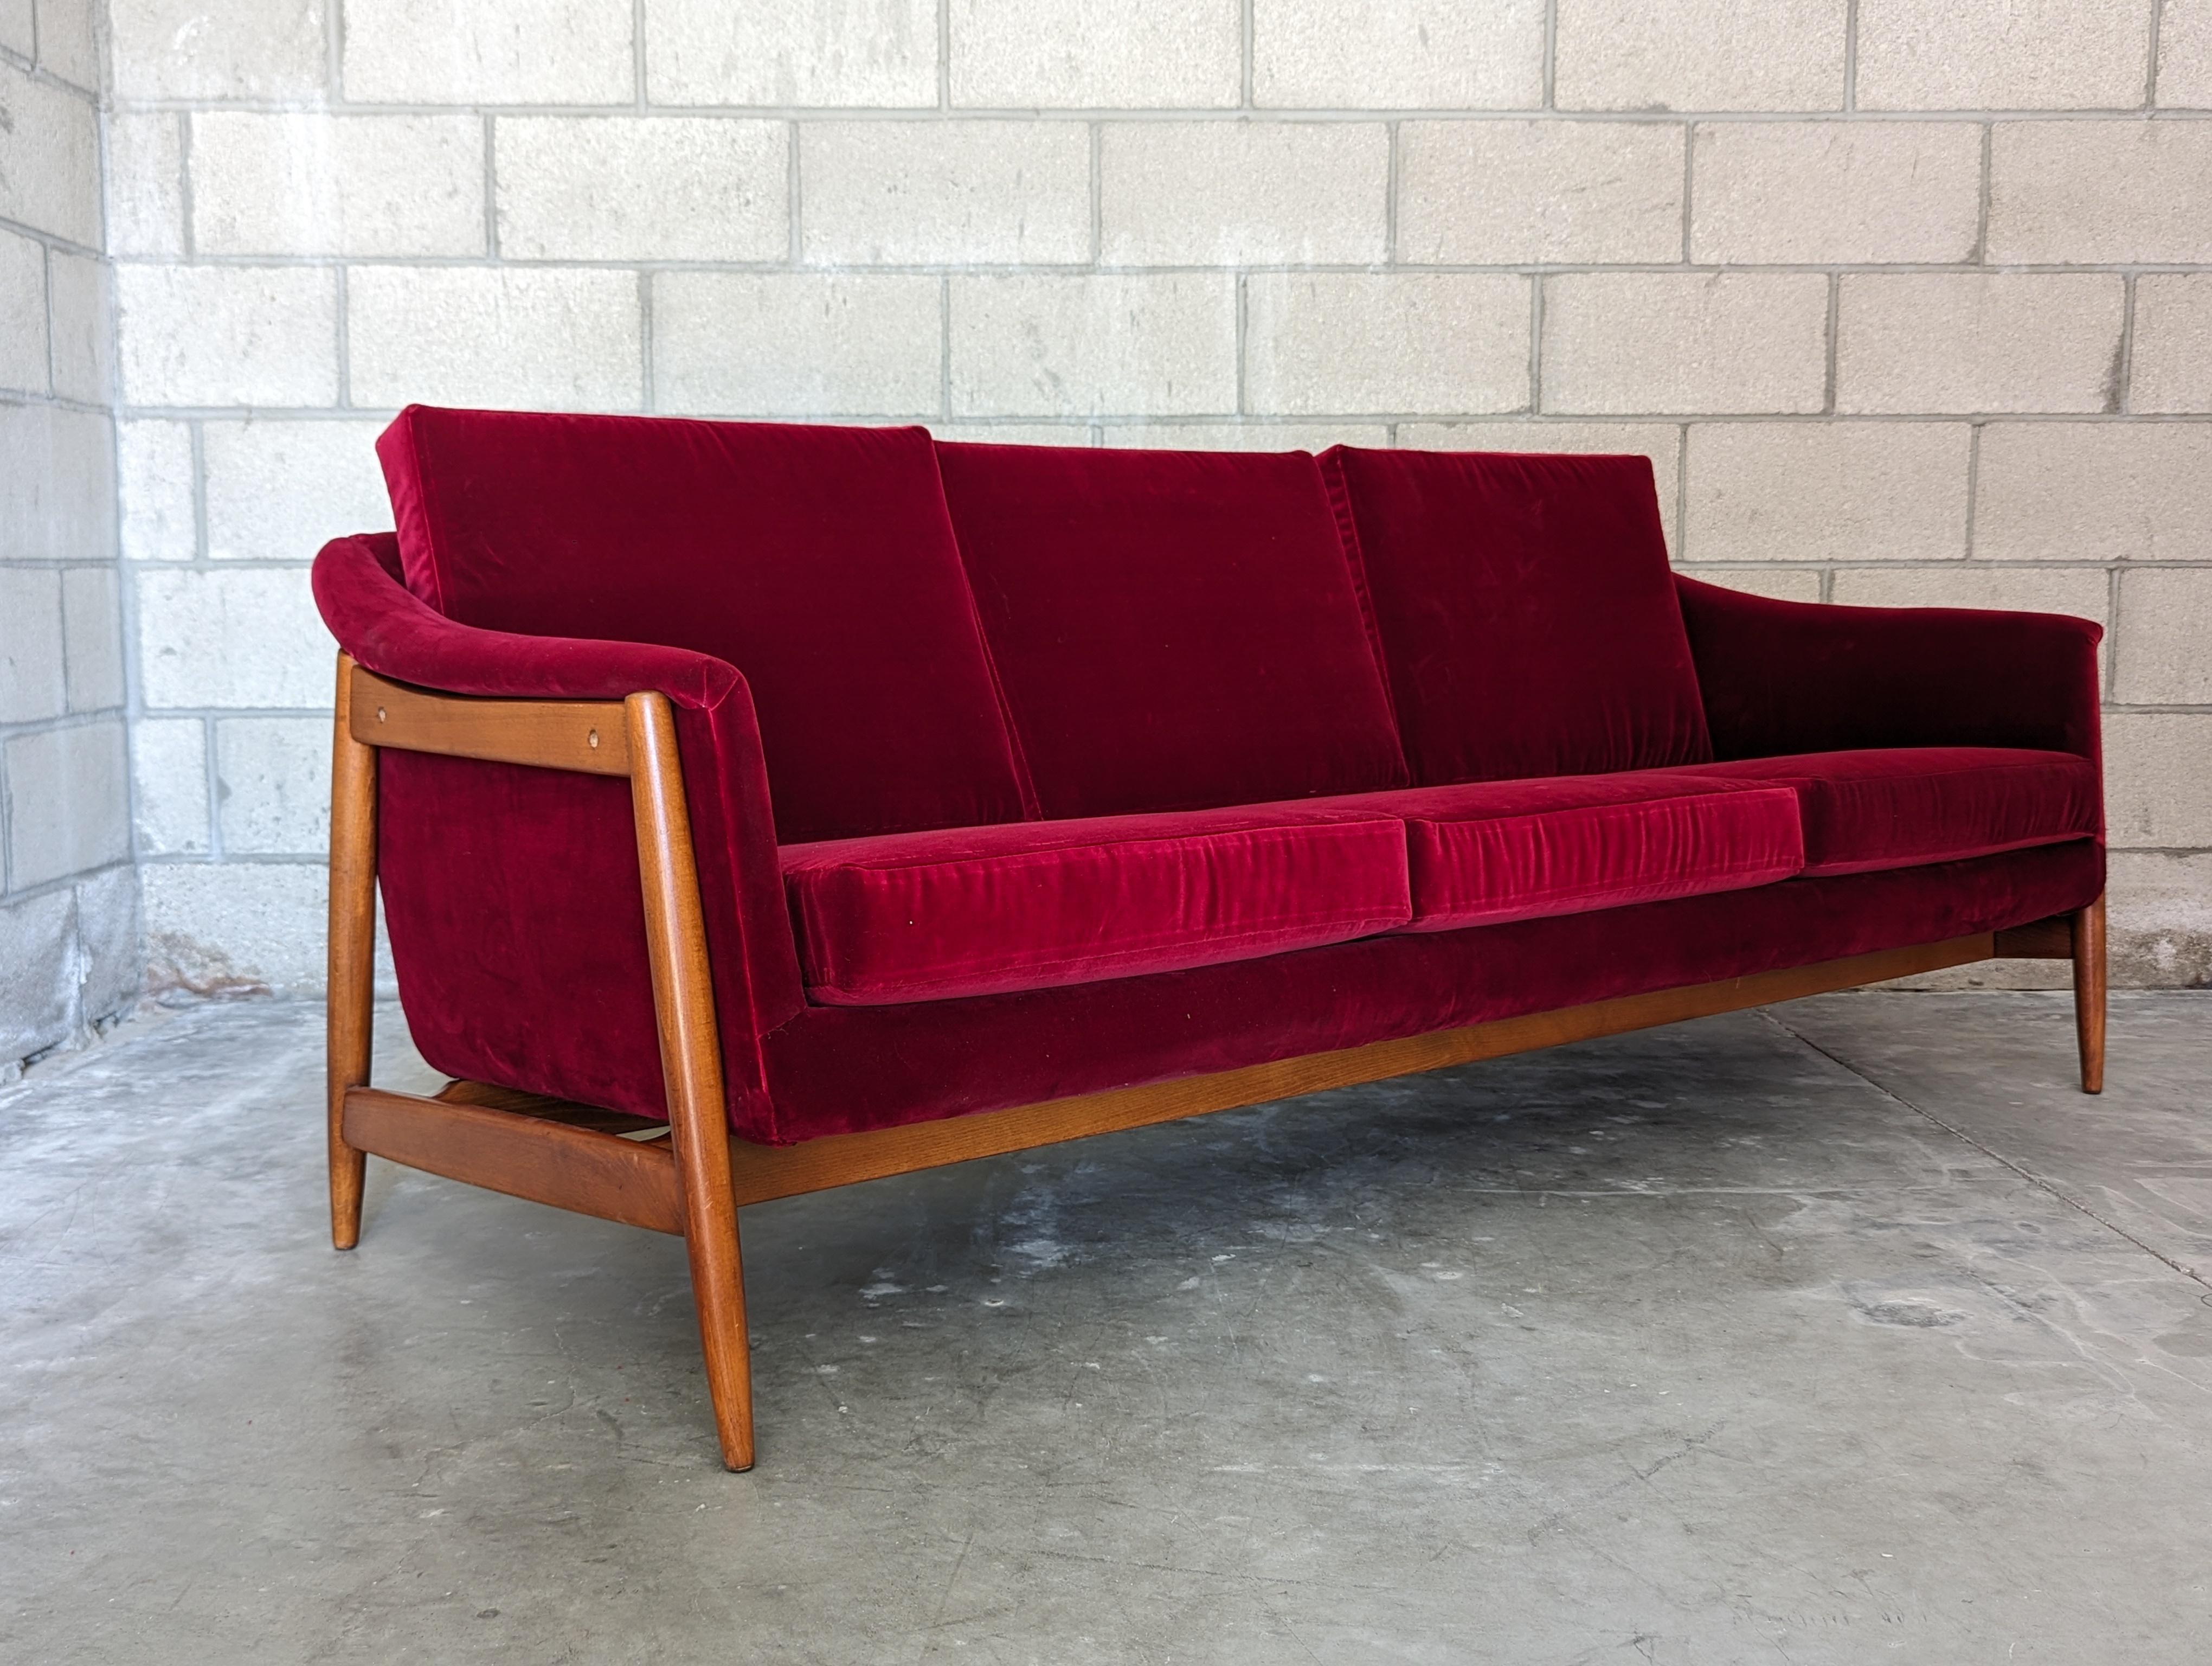 Step into a world where the past meets the present with this beautifully restored vintage mid-century modern sculptural sofa. Designed by the iconic Folke Ohlsson for Dux of Sweden in the 1960s, this sofa is more than just a piece of furniture -